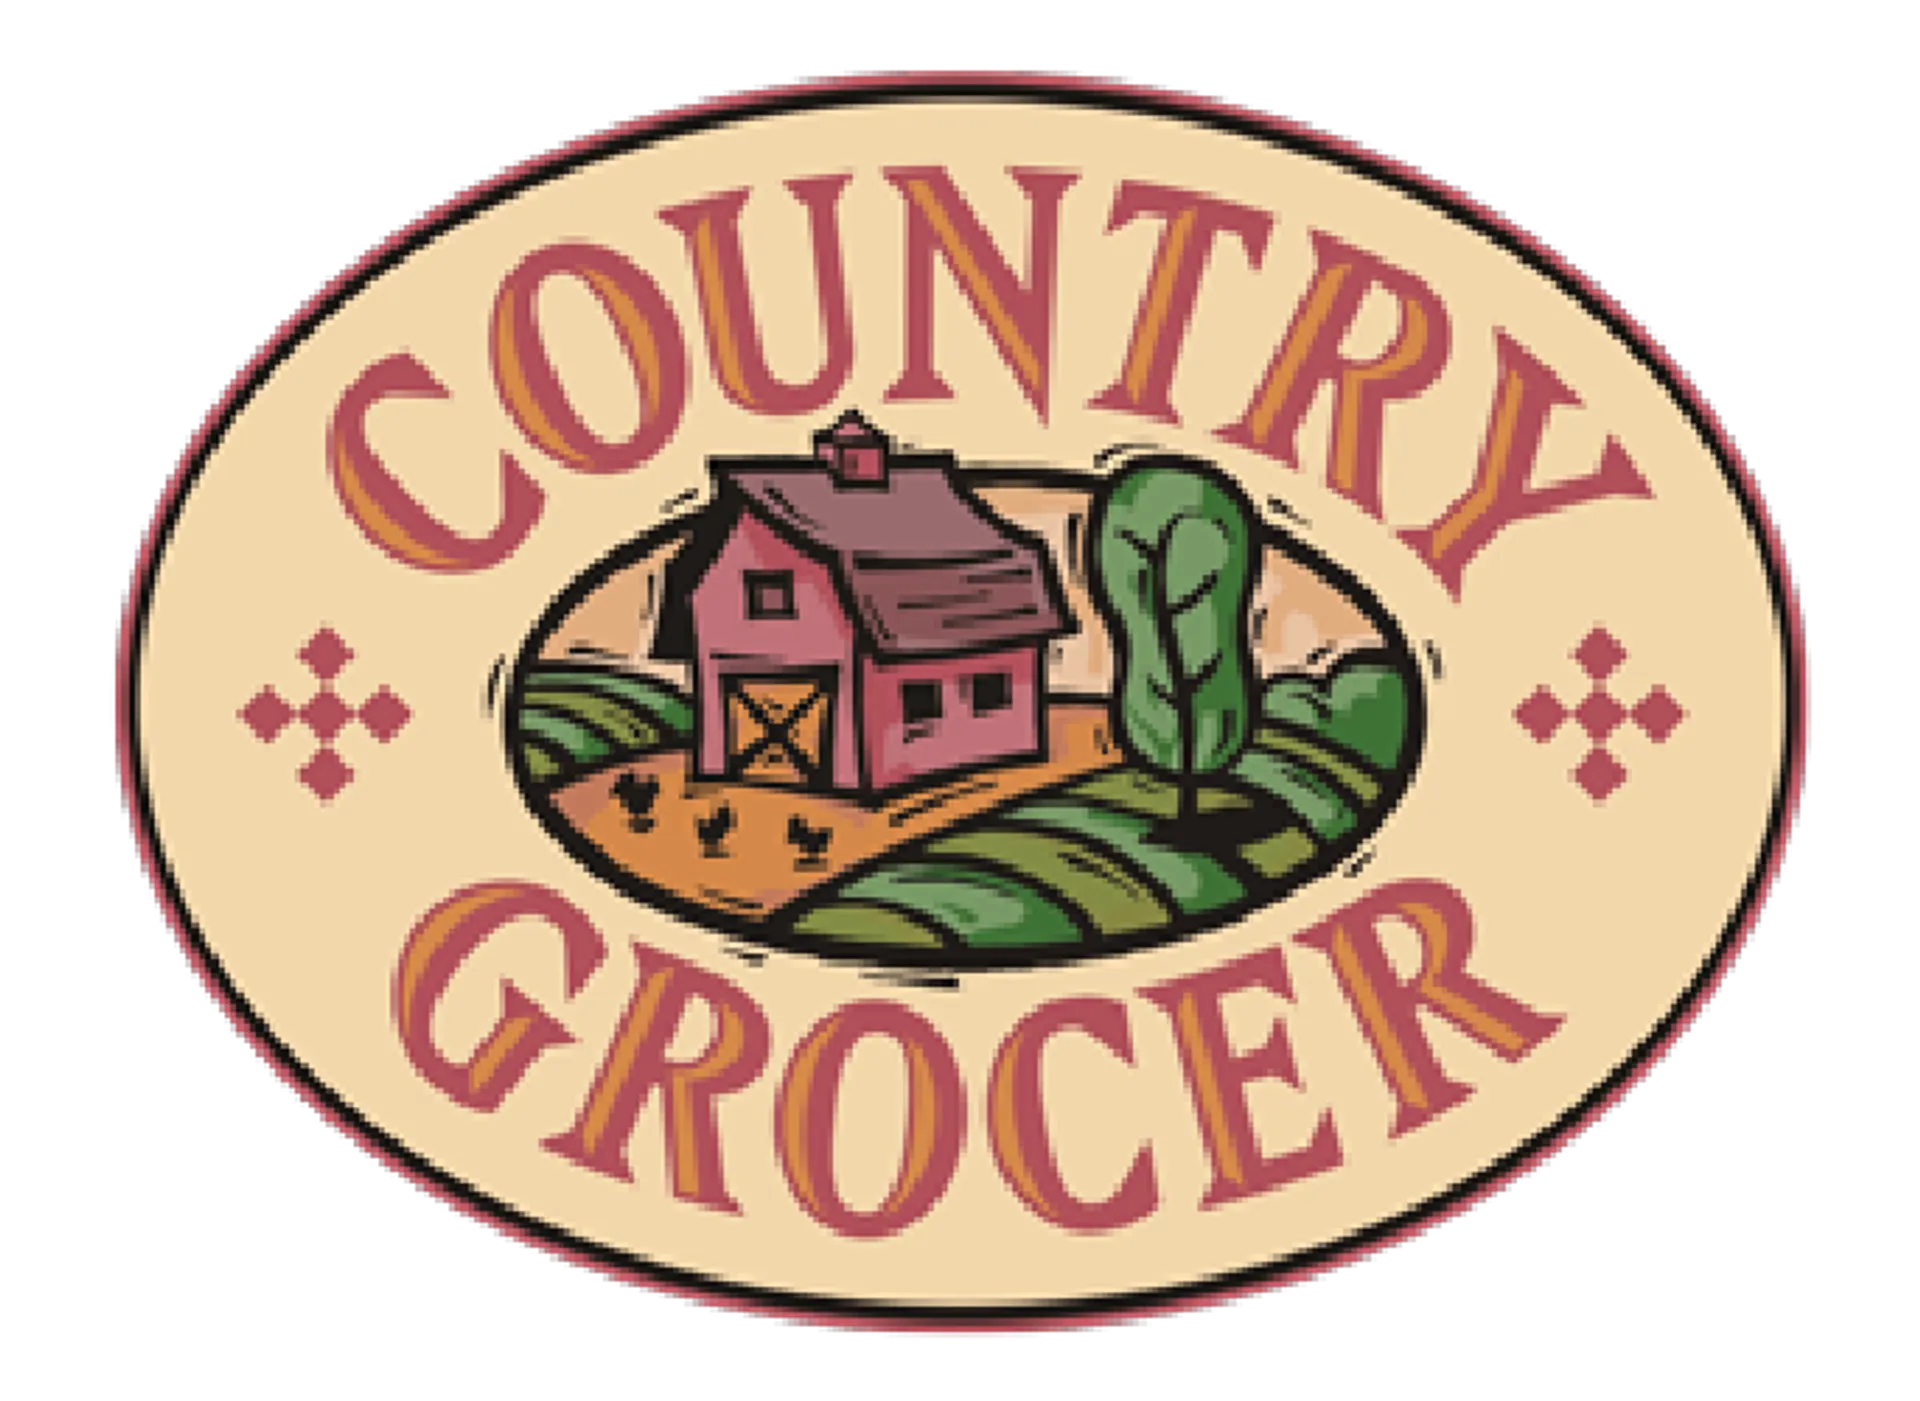 COUNTRY GROCER logo